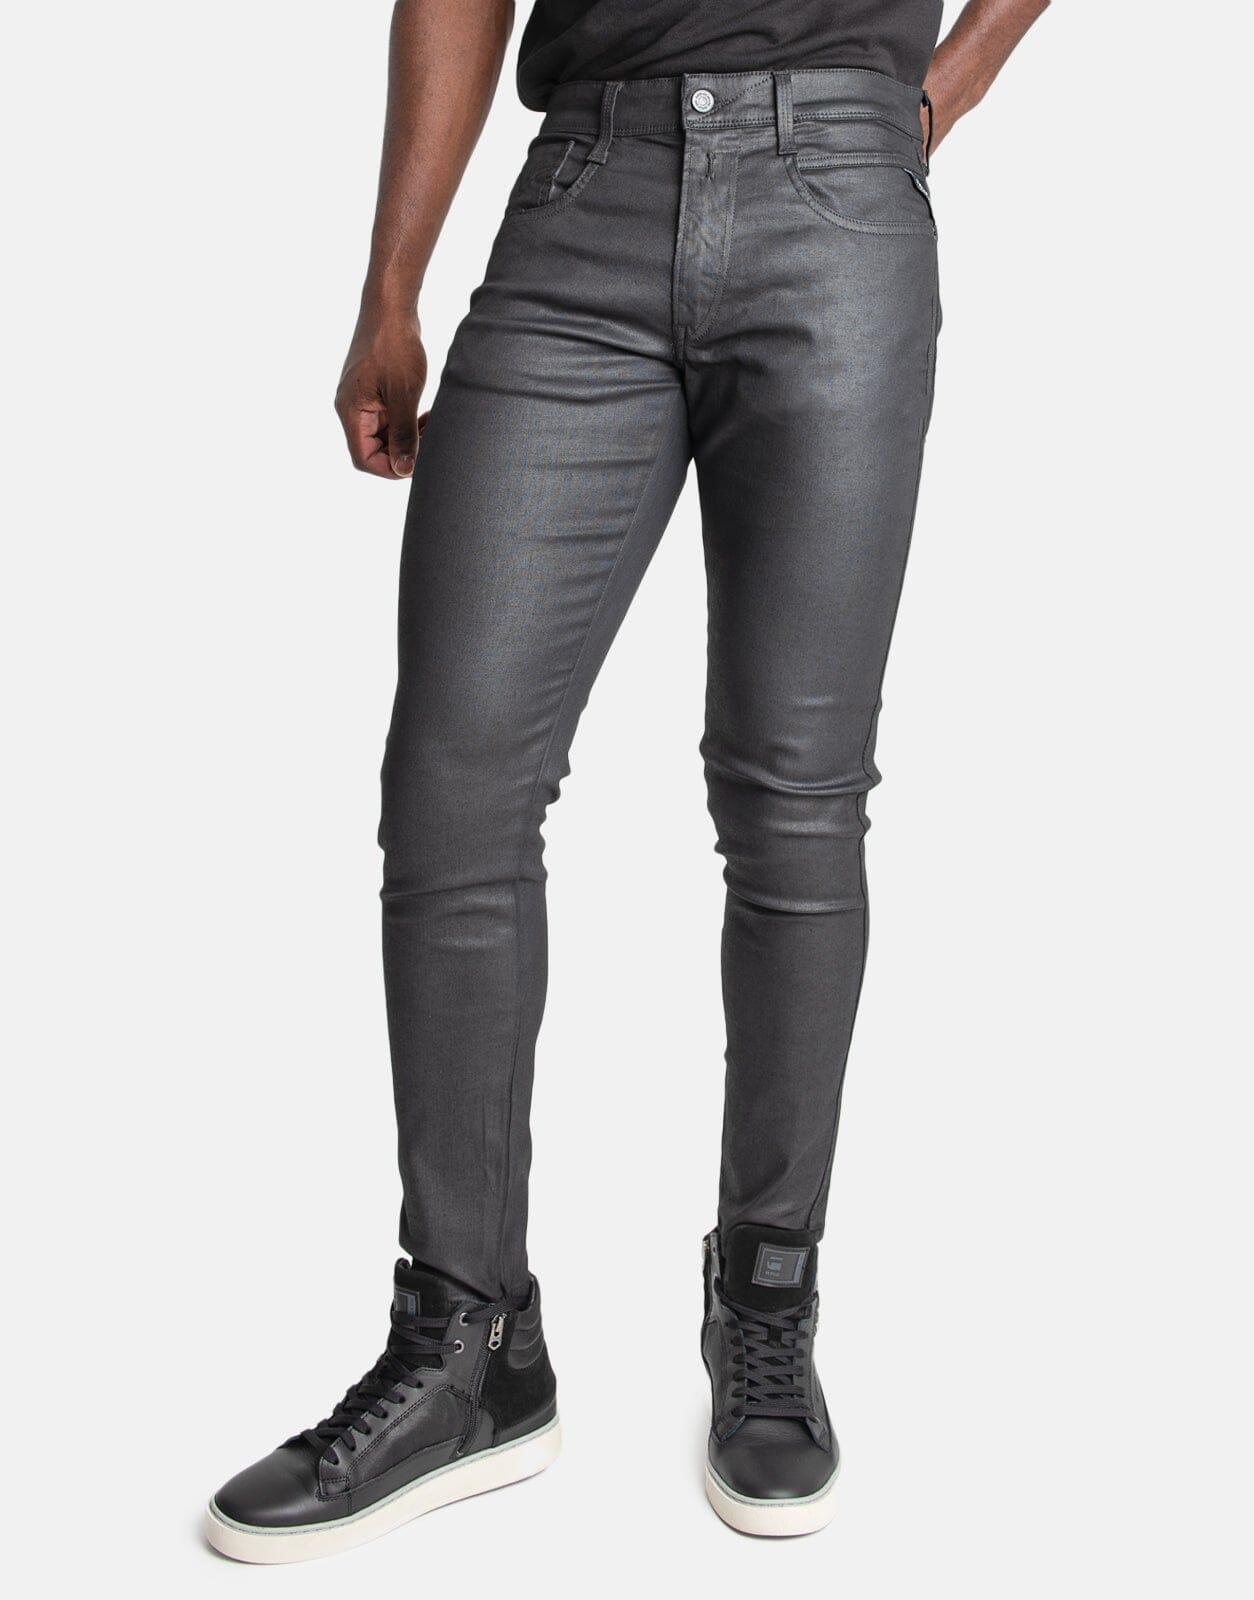 Replay Coated Black Power Stretch Jeans - Subwear